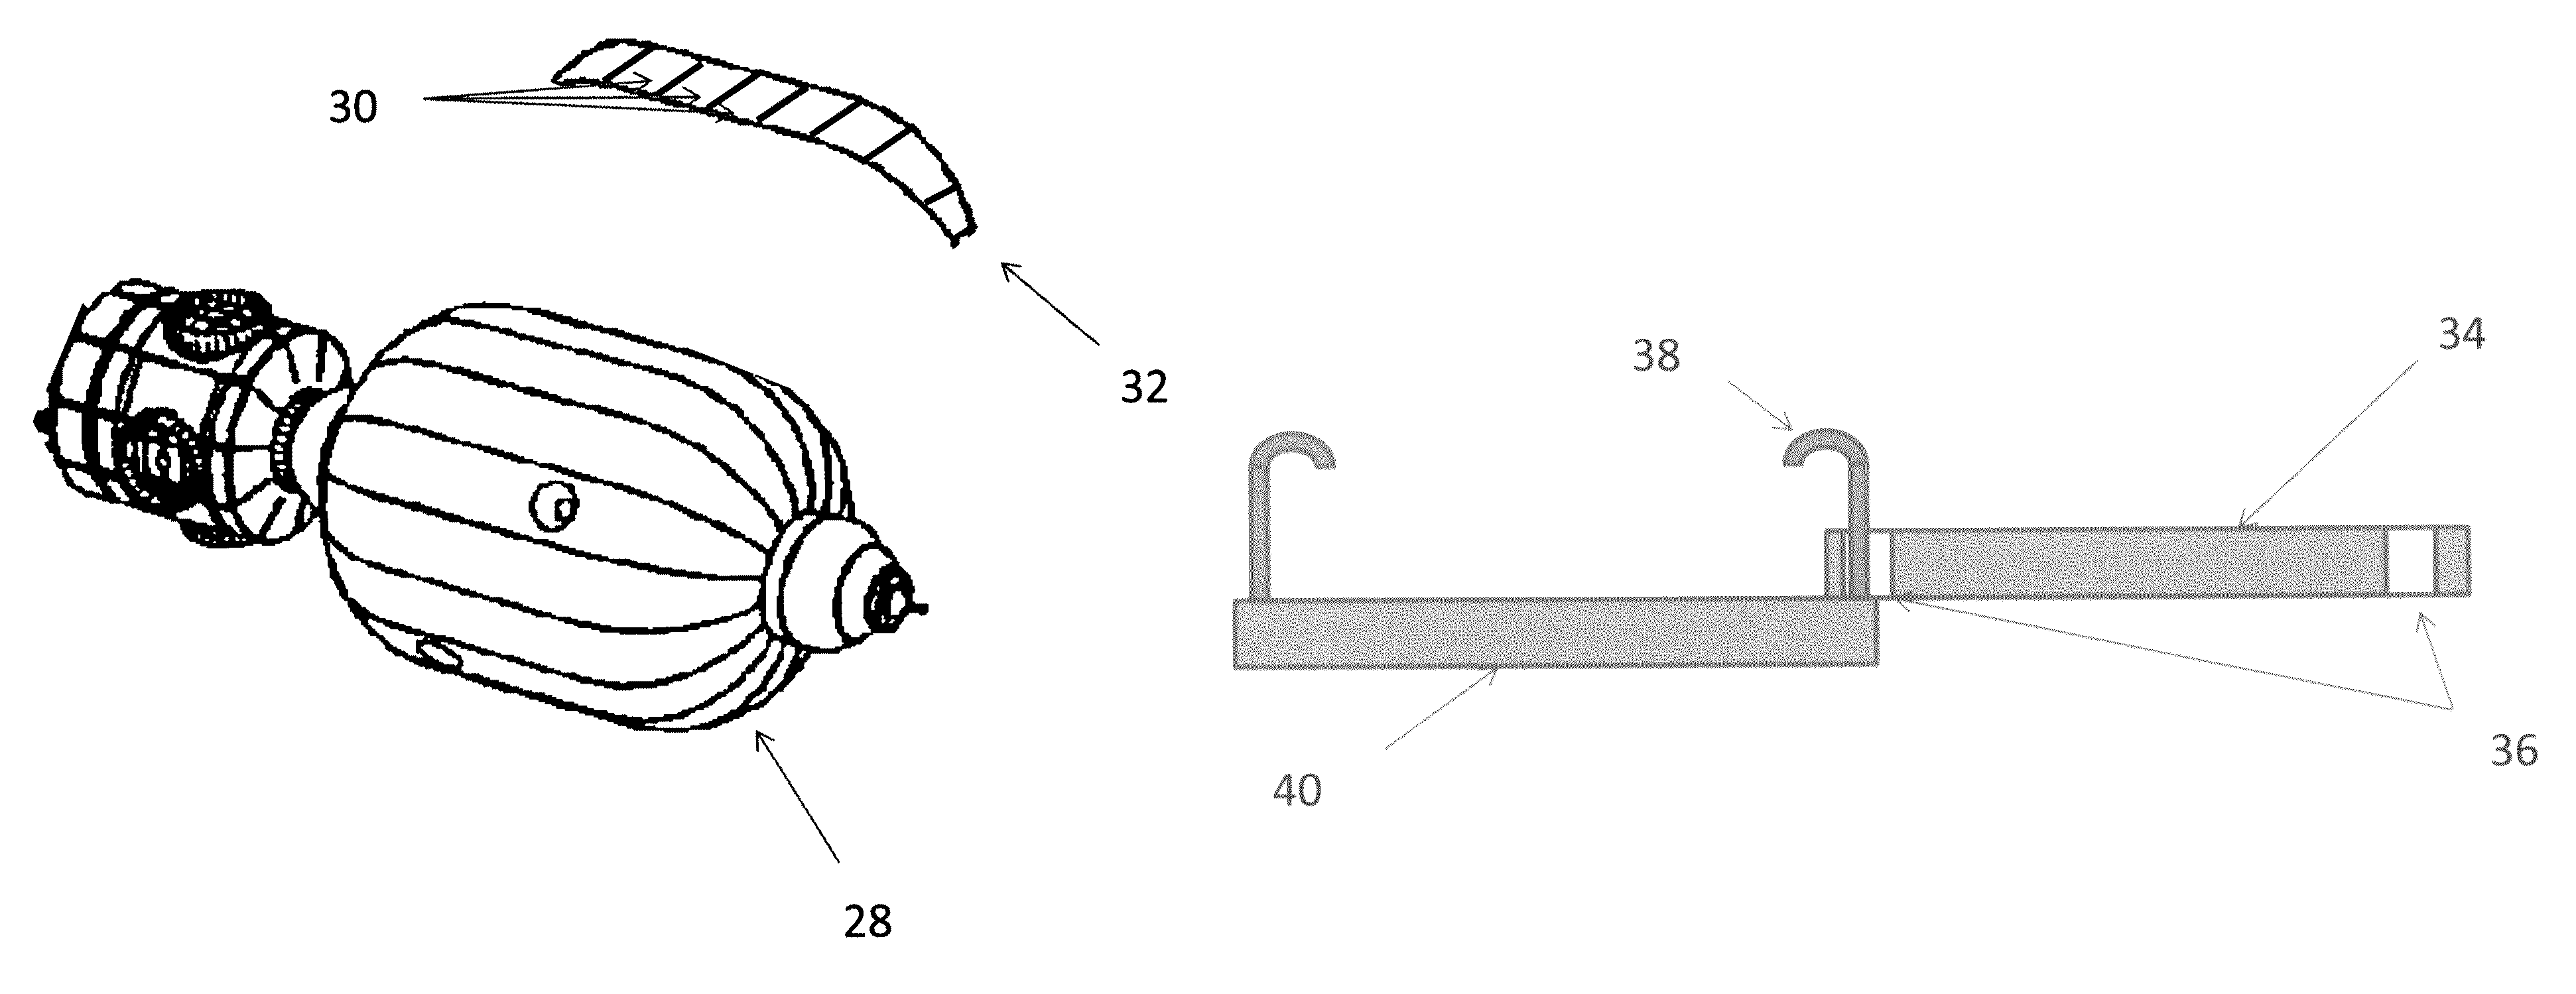 Method of deploying a spacecraft shield in space